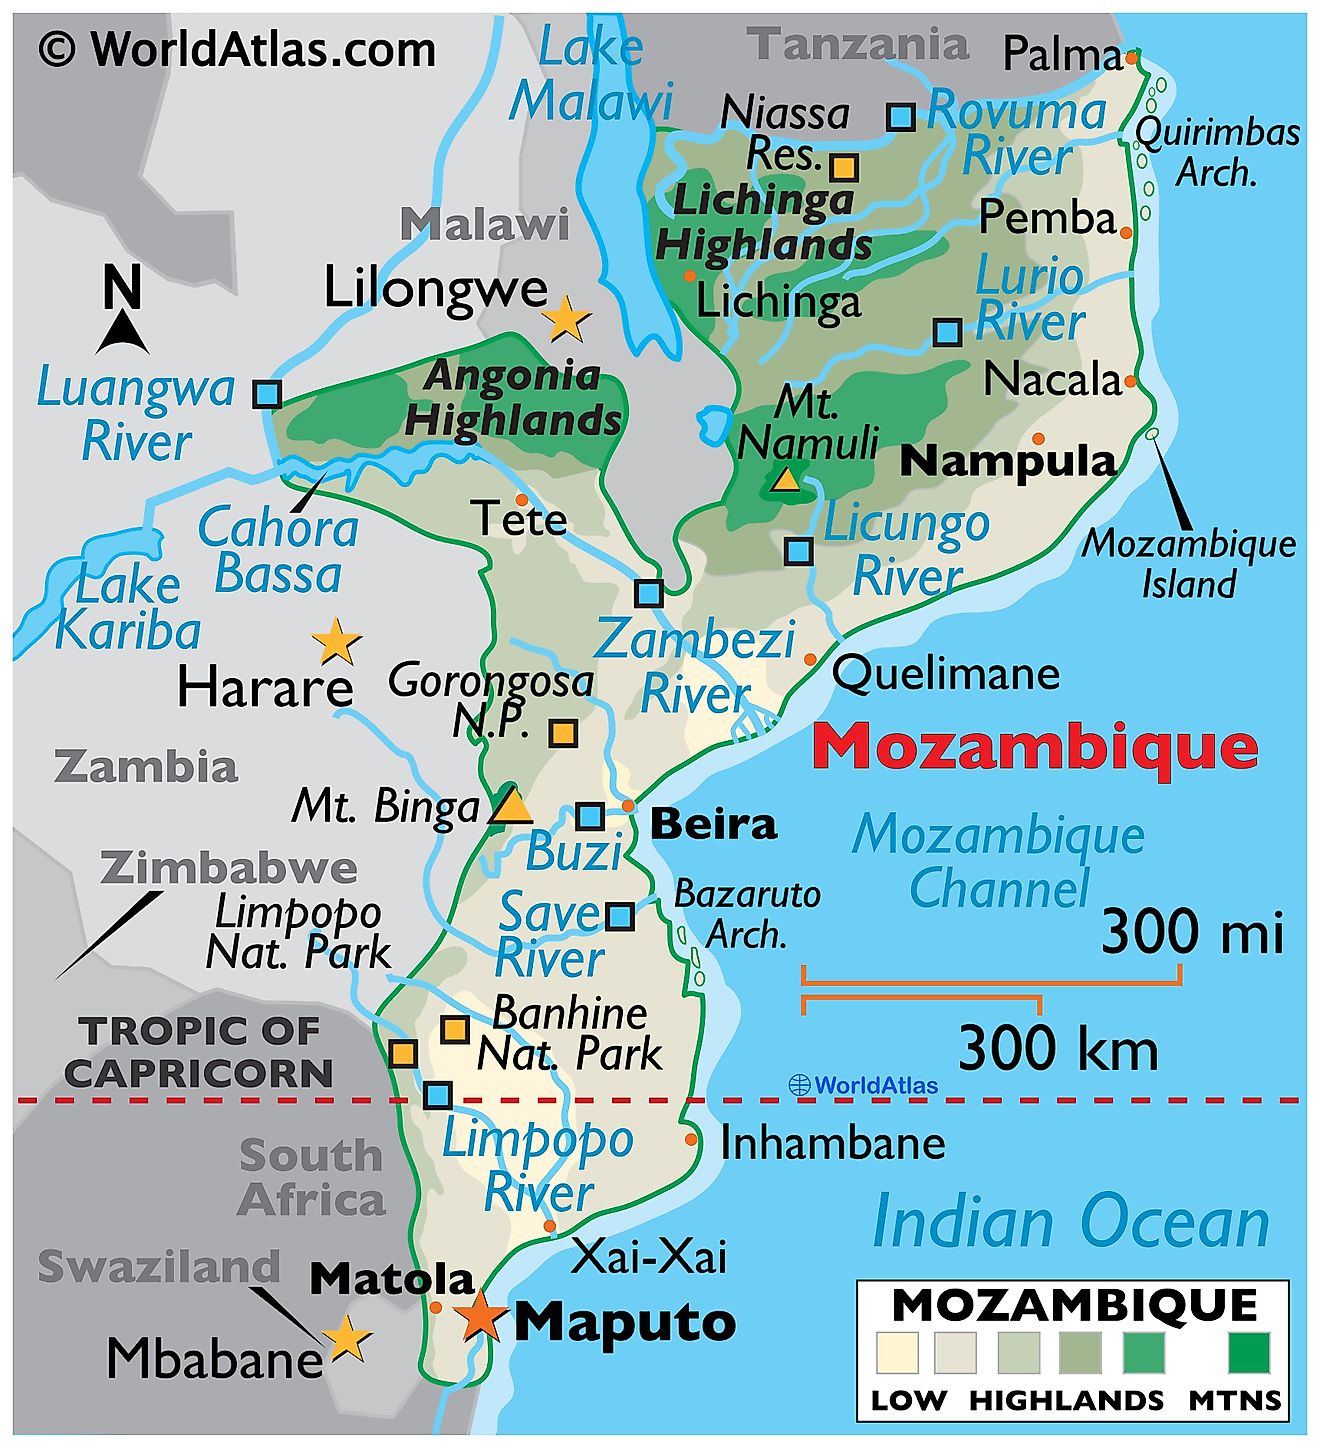 mozambique state department travel